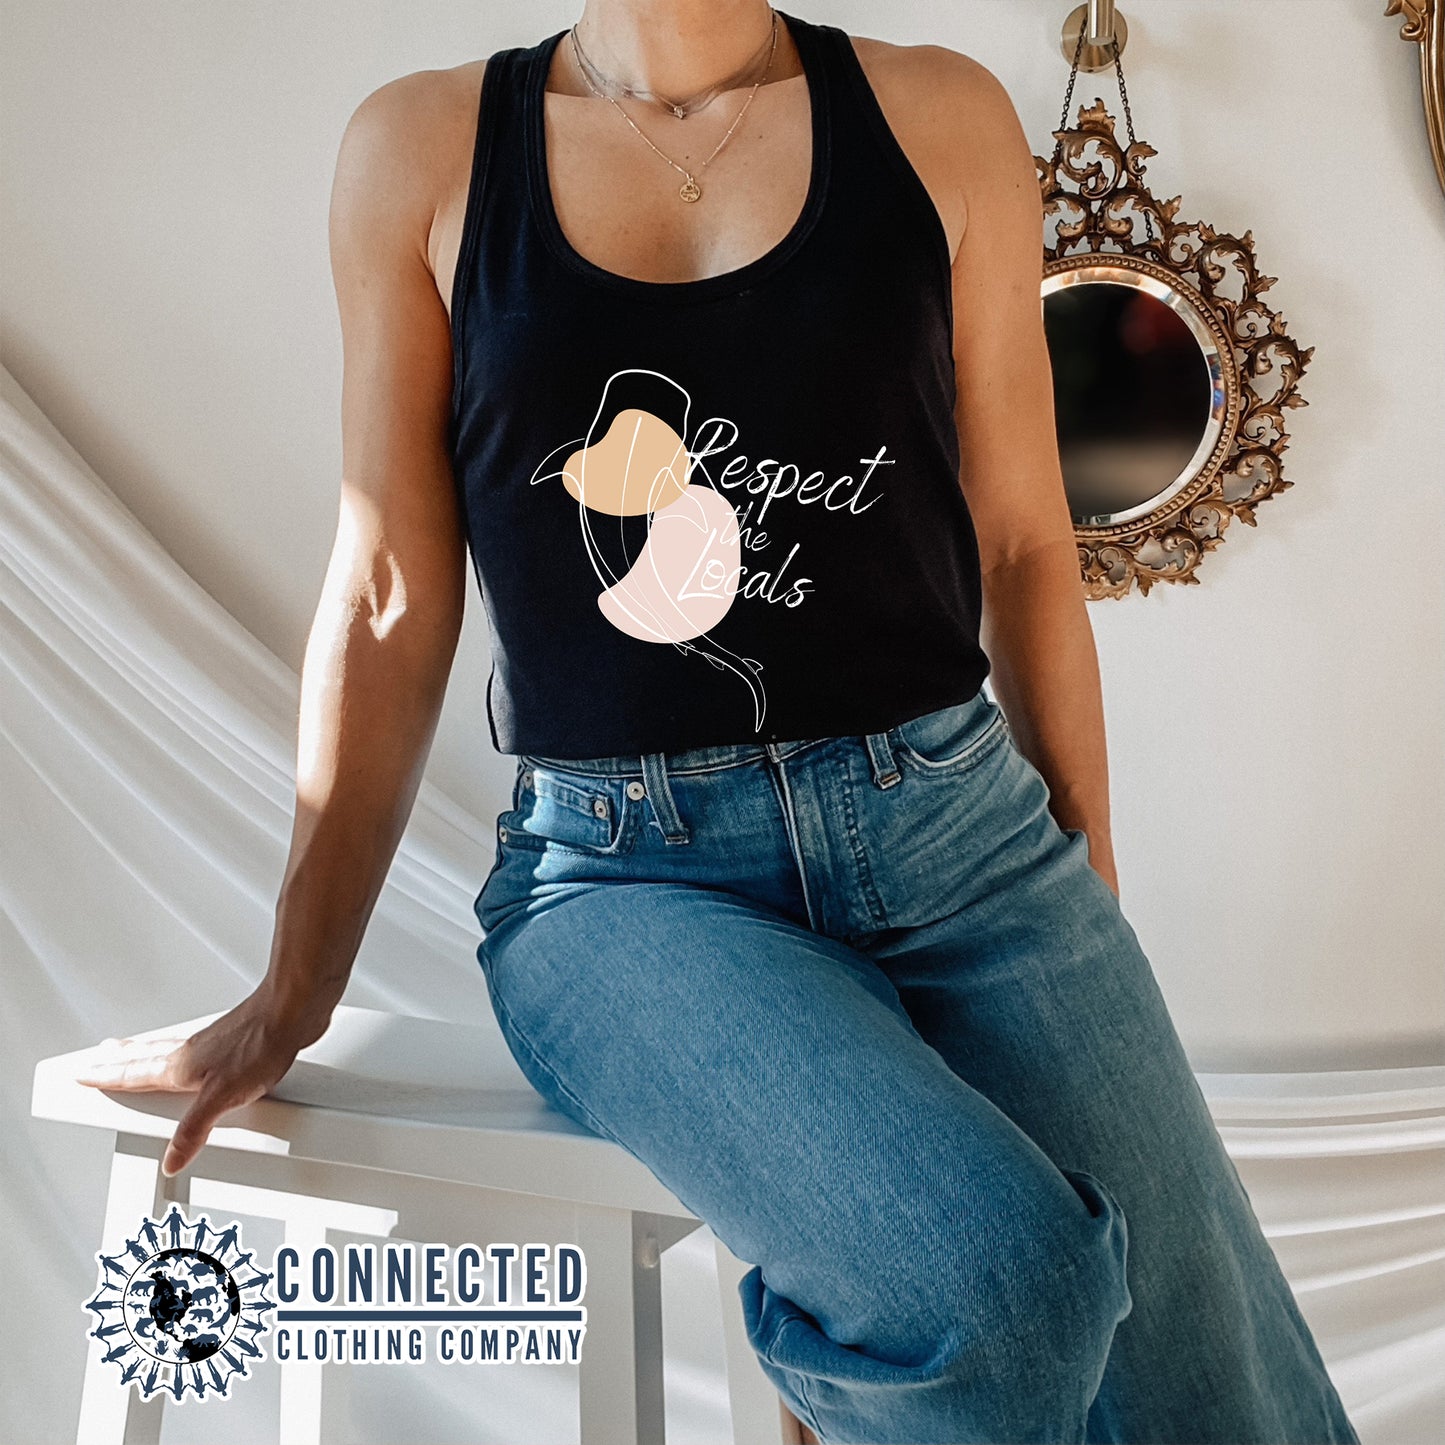 Black Respect The Locals Whale Shark Tank Top - sharonkornman - 10% of proceeds are donated to ocean conservation